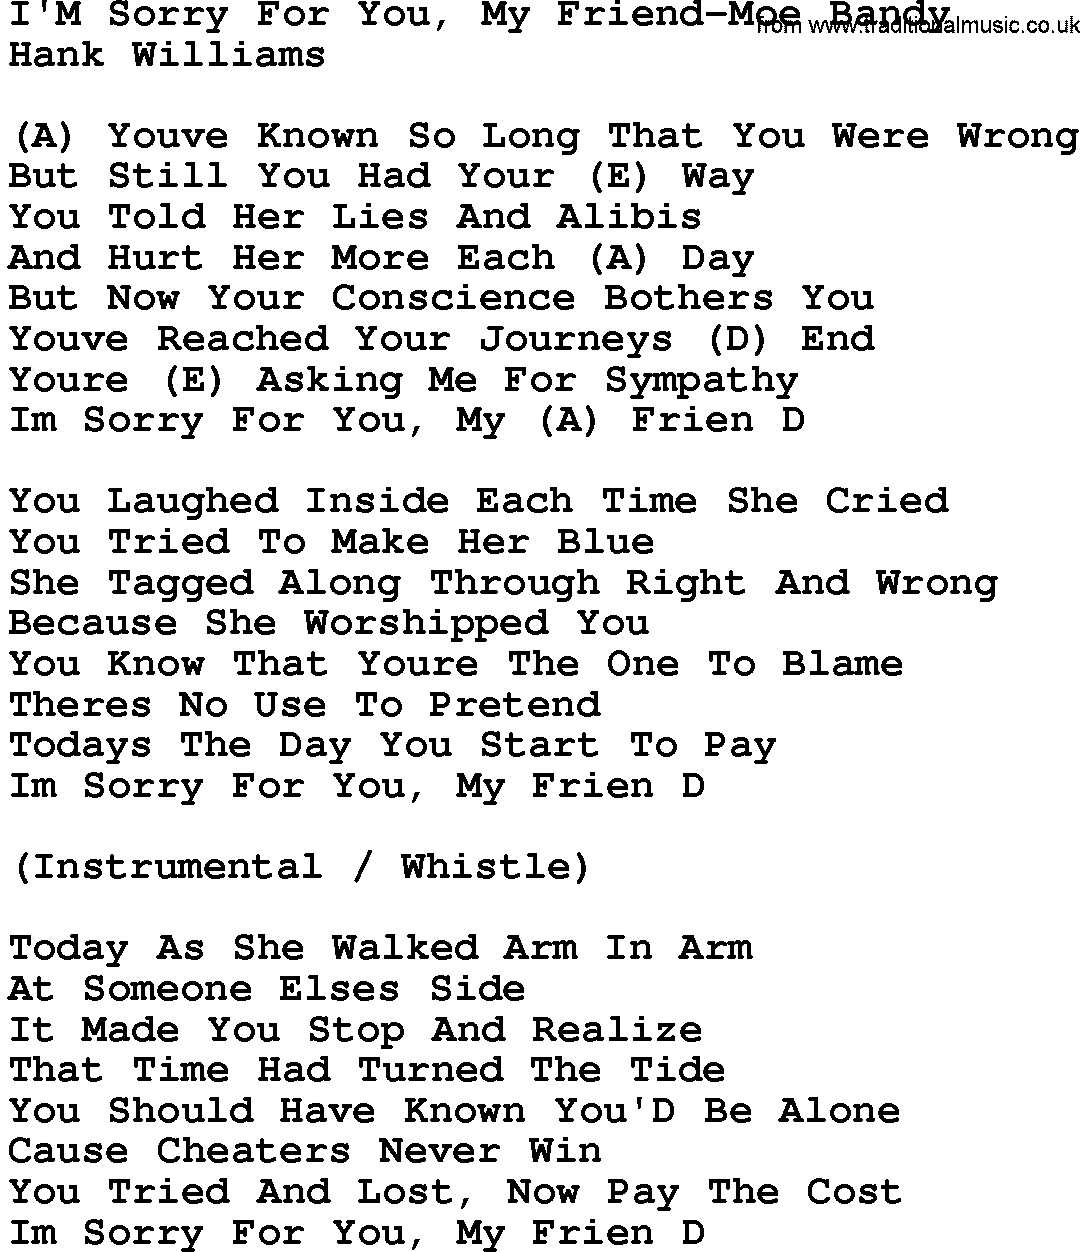 Country music song: I'm Sorry For You, My Friend-Moe Bandy lyrics and chords